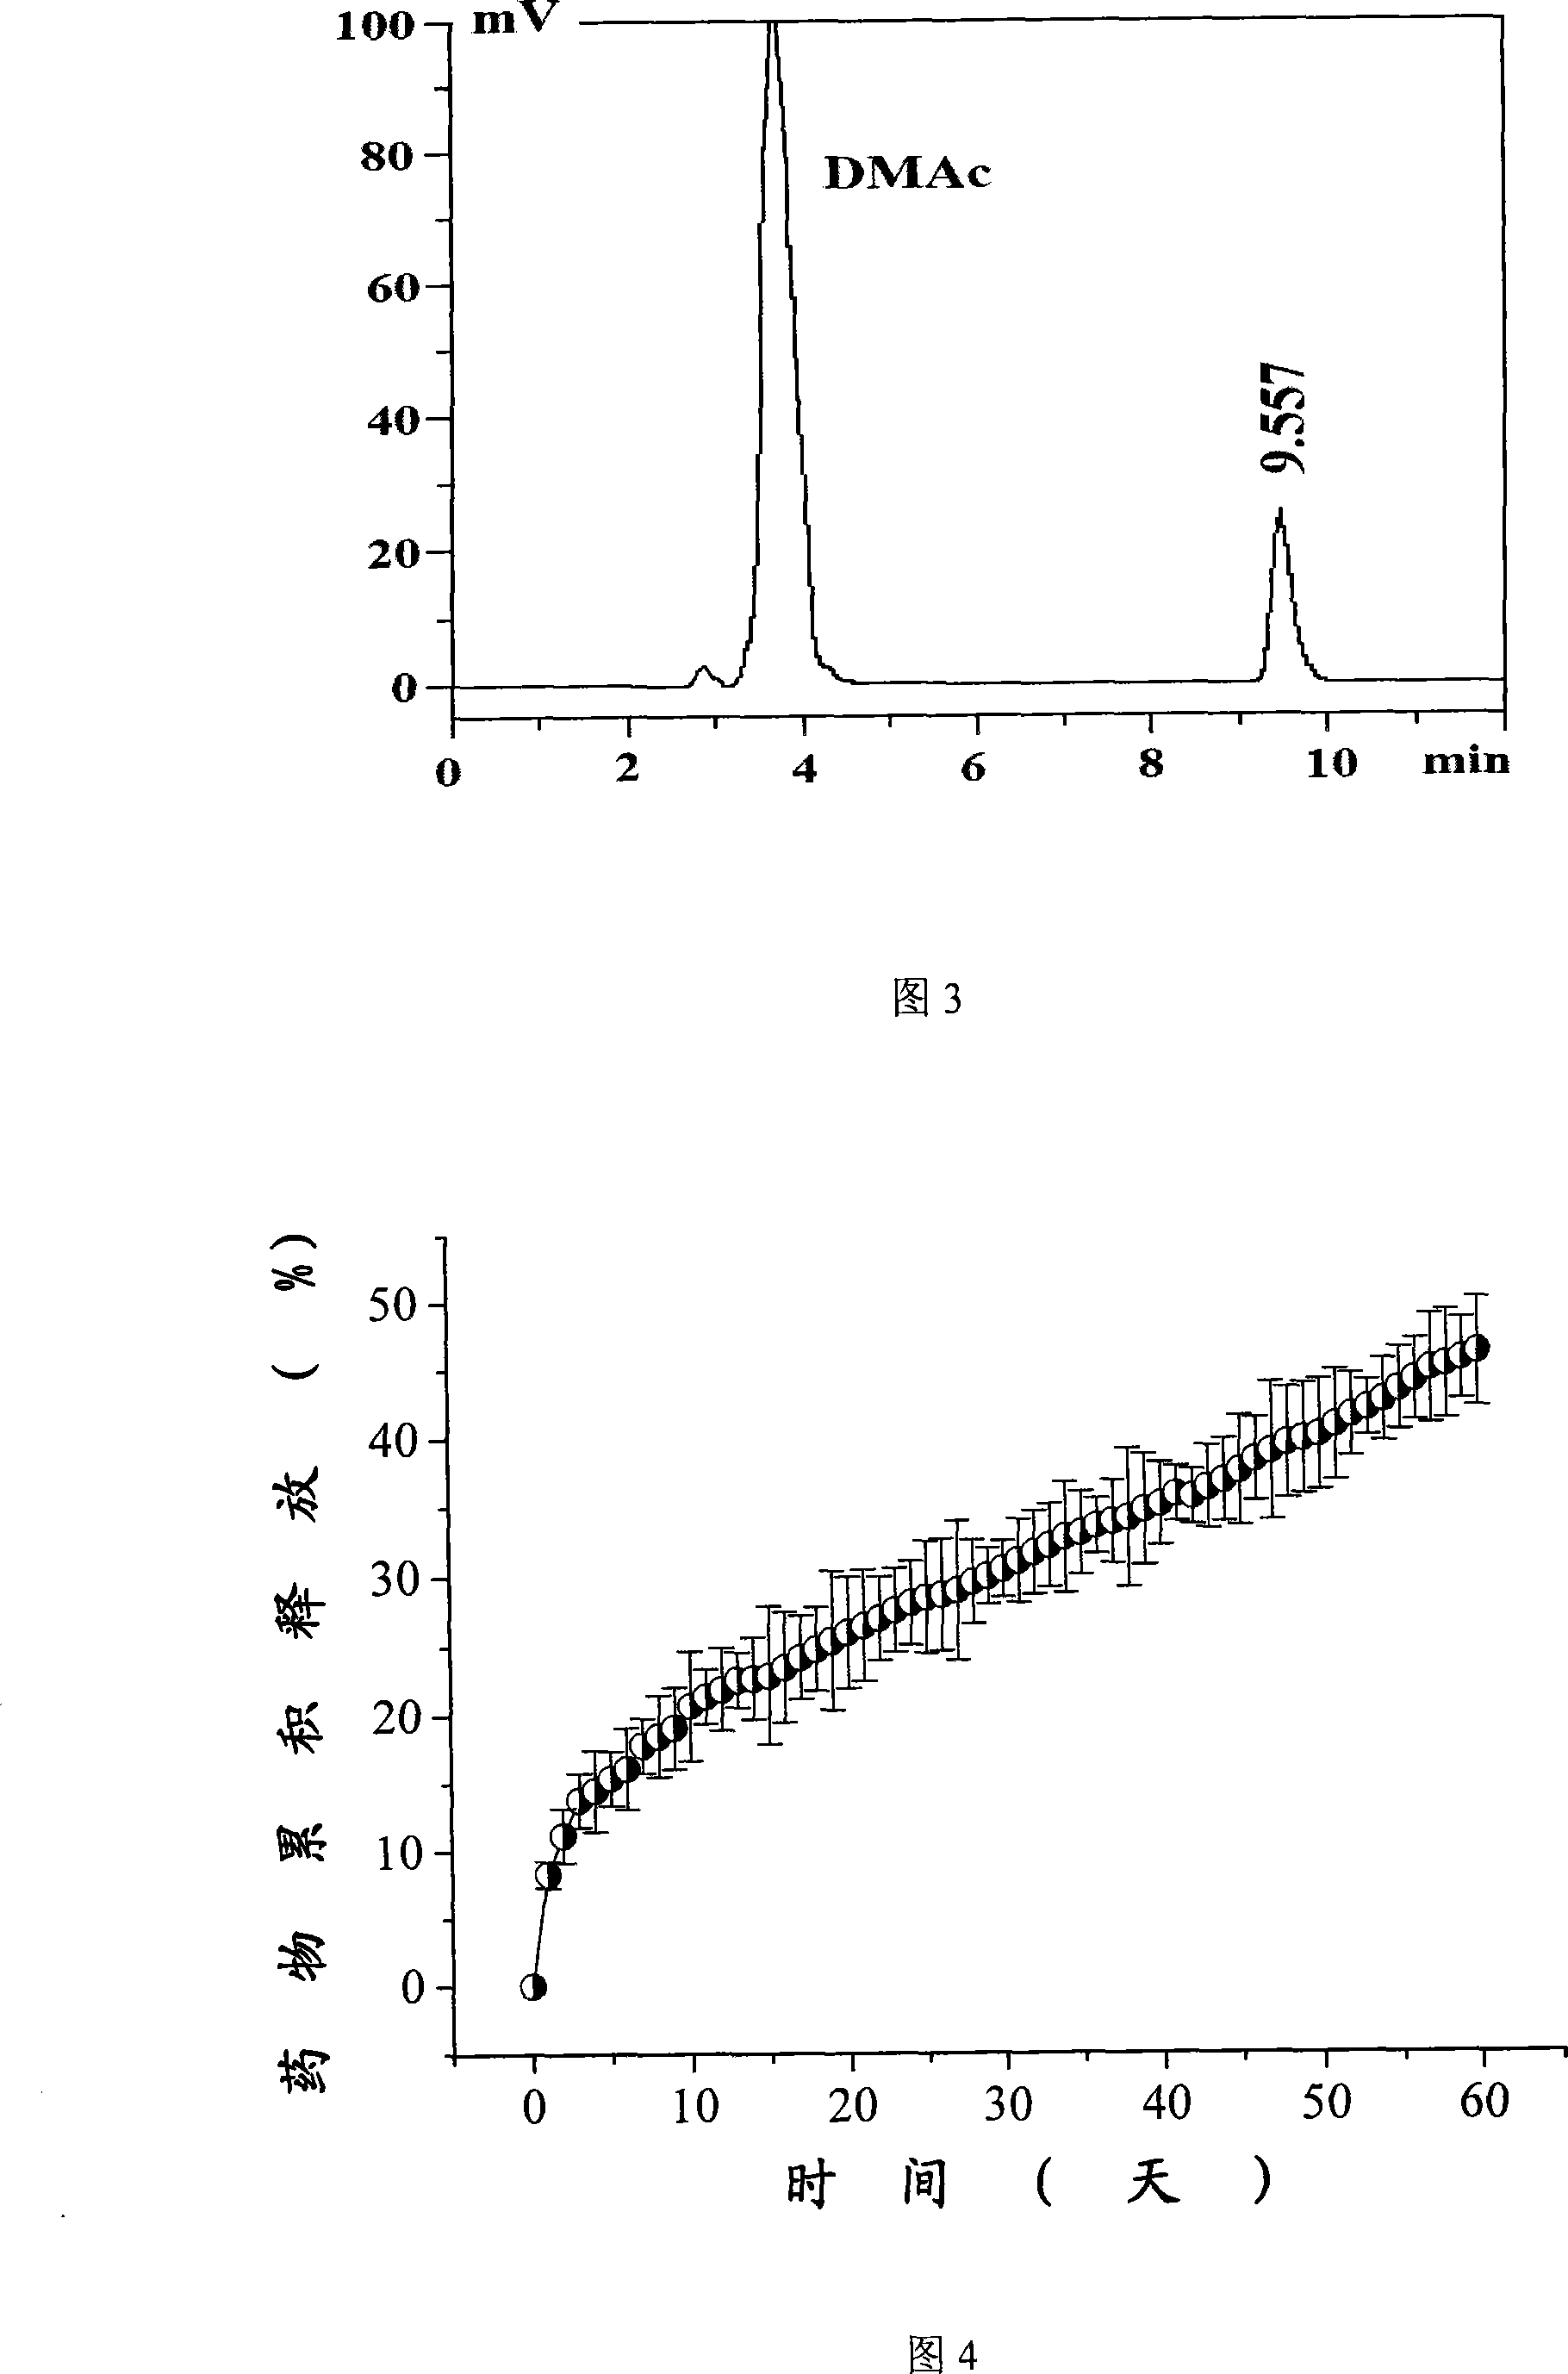 Long-acting medicine-loading orlon fibre capable of degrading partly, preparation and application thereof